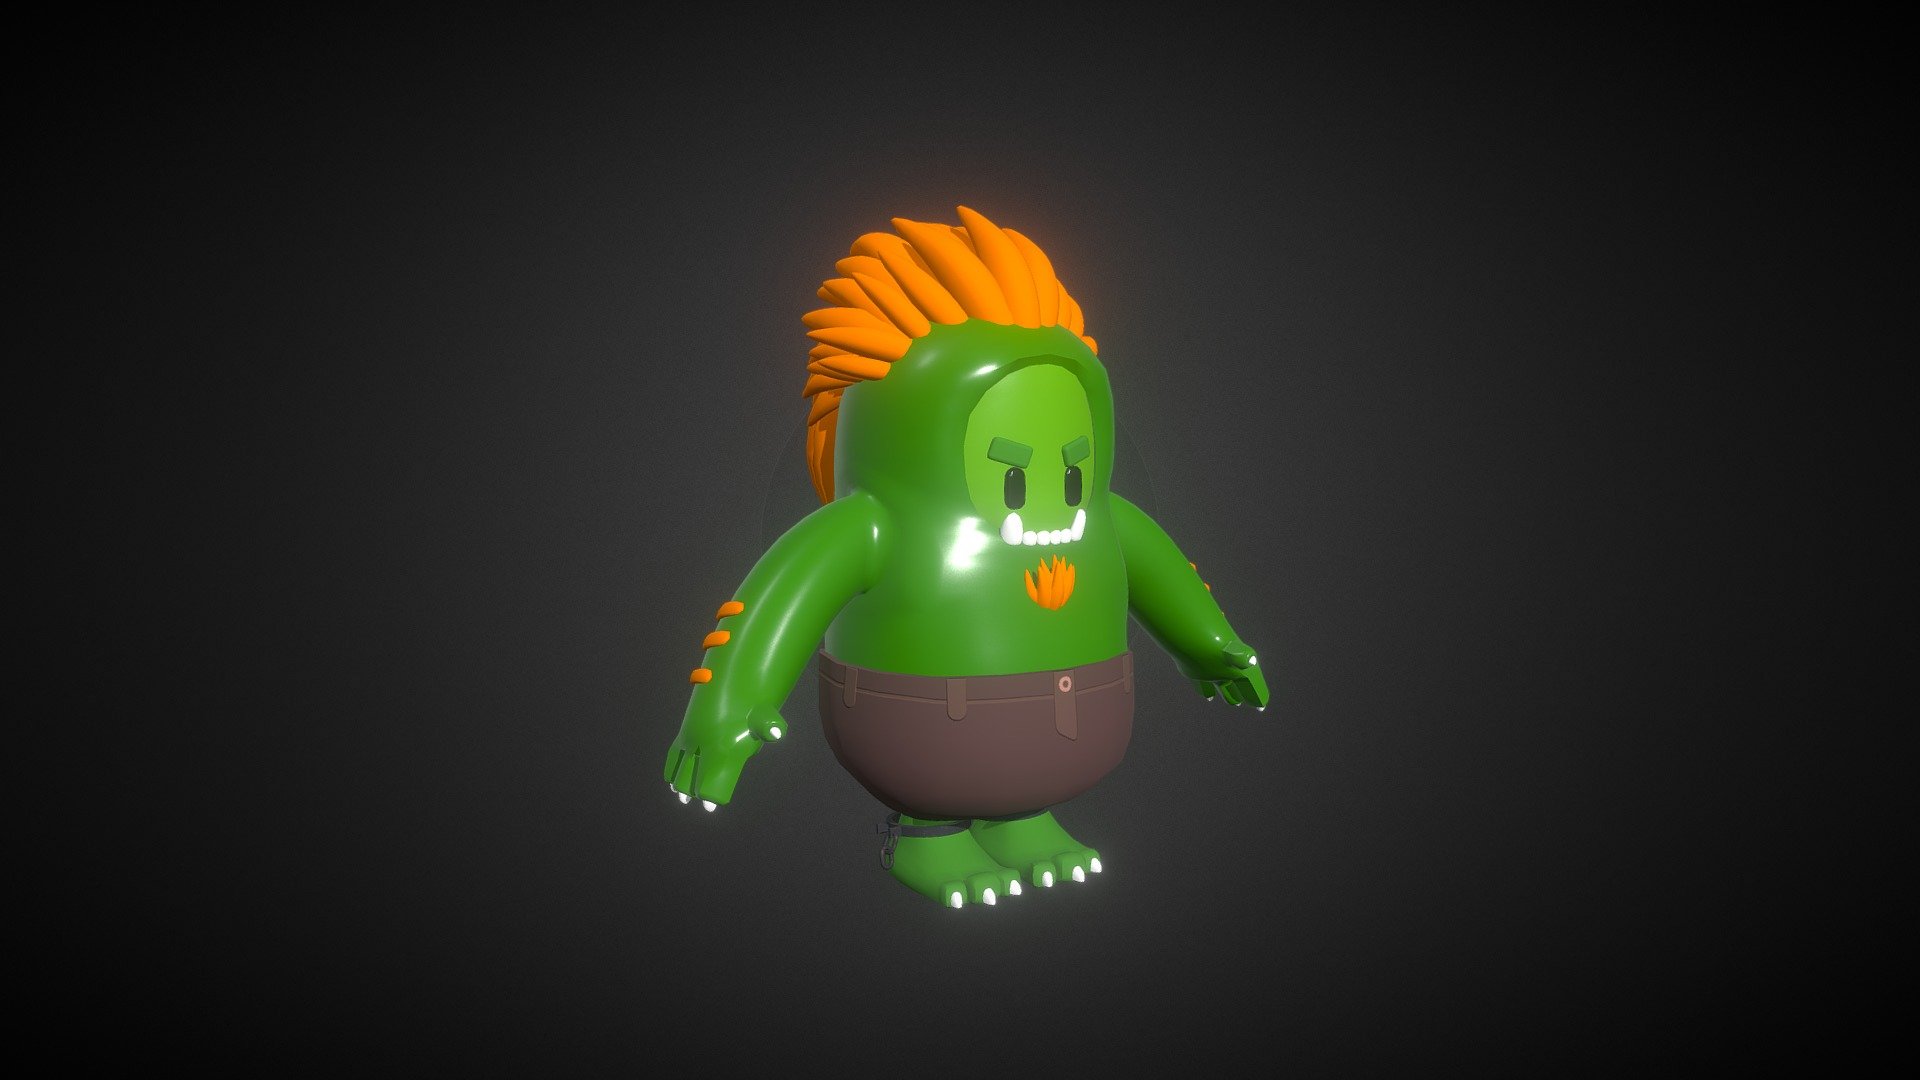 This is a skin made for school project based on a Fall Guys character at FIAP, inspired on Blanka from Street Fighter 3d model